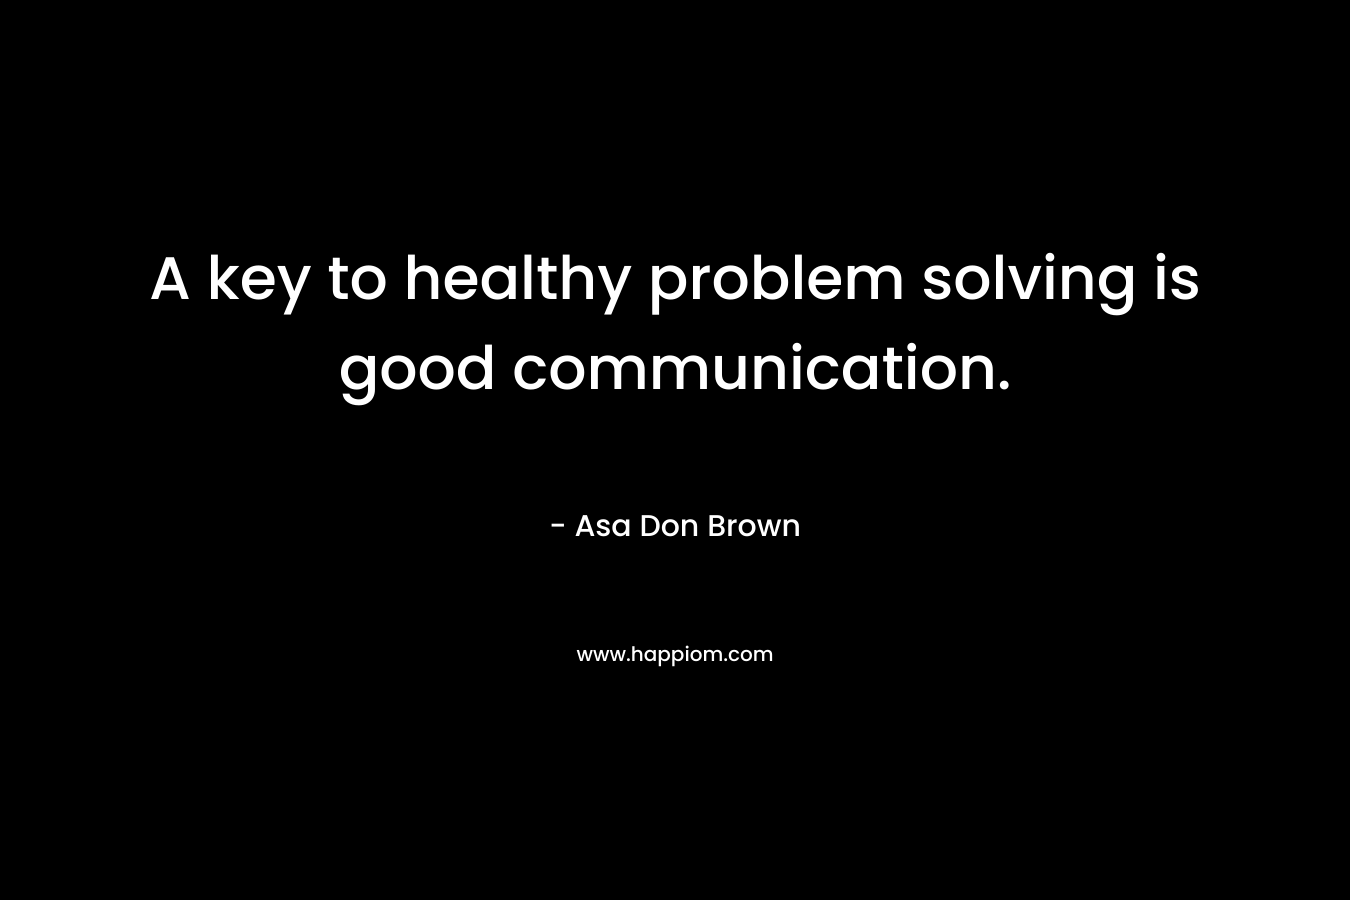 A key to healthy problem solving is good communication.